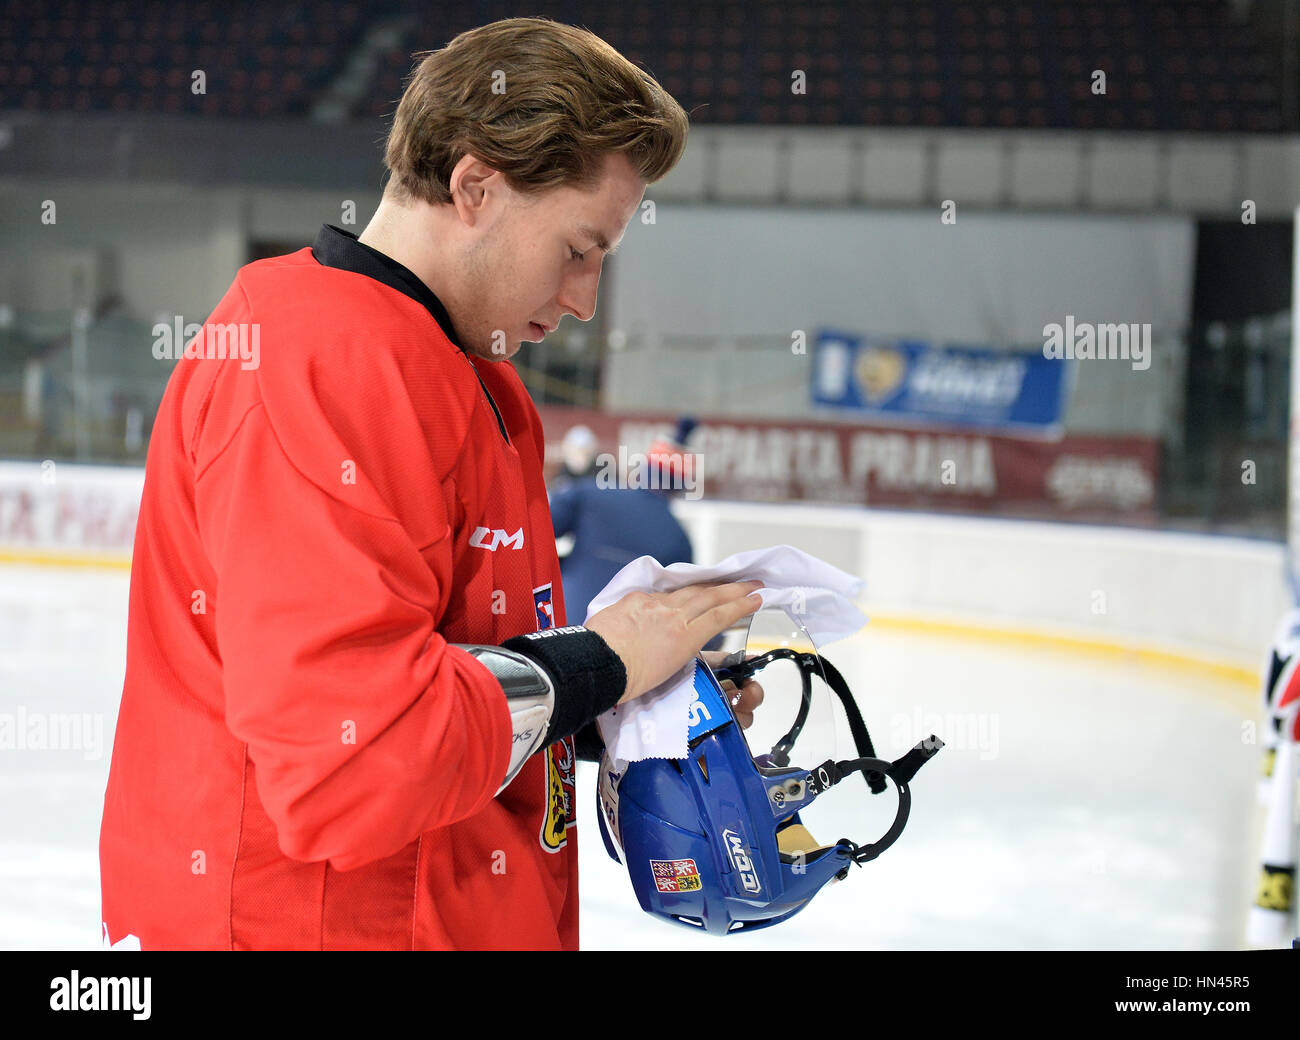 Prague, Czech Republic. 08th Feb, 2017. The Czech national ice-hockey team's player Lukas Klok in action during the training session prior to the February Sweden Games in Gothenburg in Prague, Czech Republic, February 8, 2017. Sweden Games, the third part of the European Hockey Tour (EHT) series, will take place on February 9-12. Credit: Katerina Sulova/CTK Photo/Alamy Live News Stock Photo